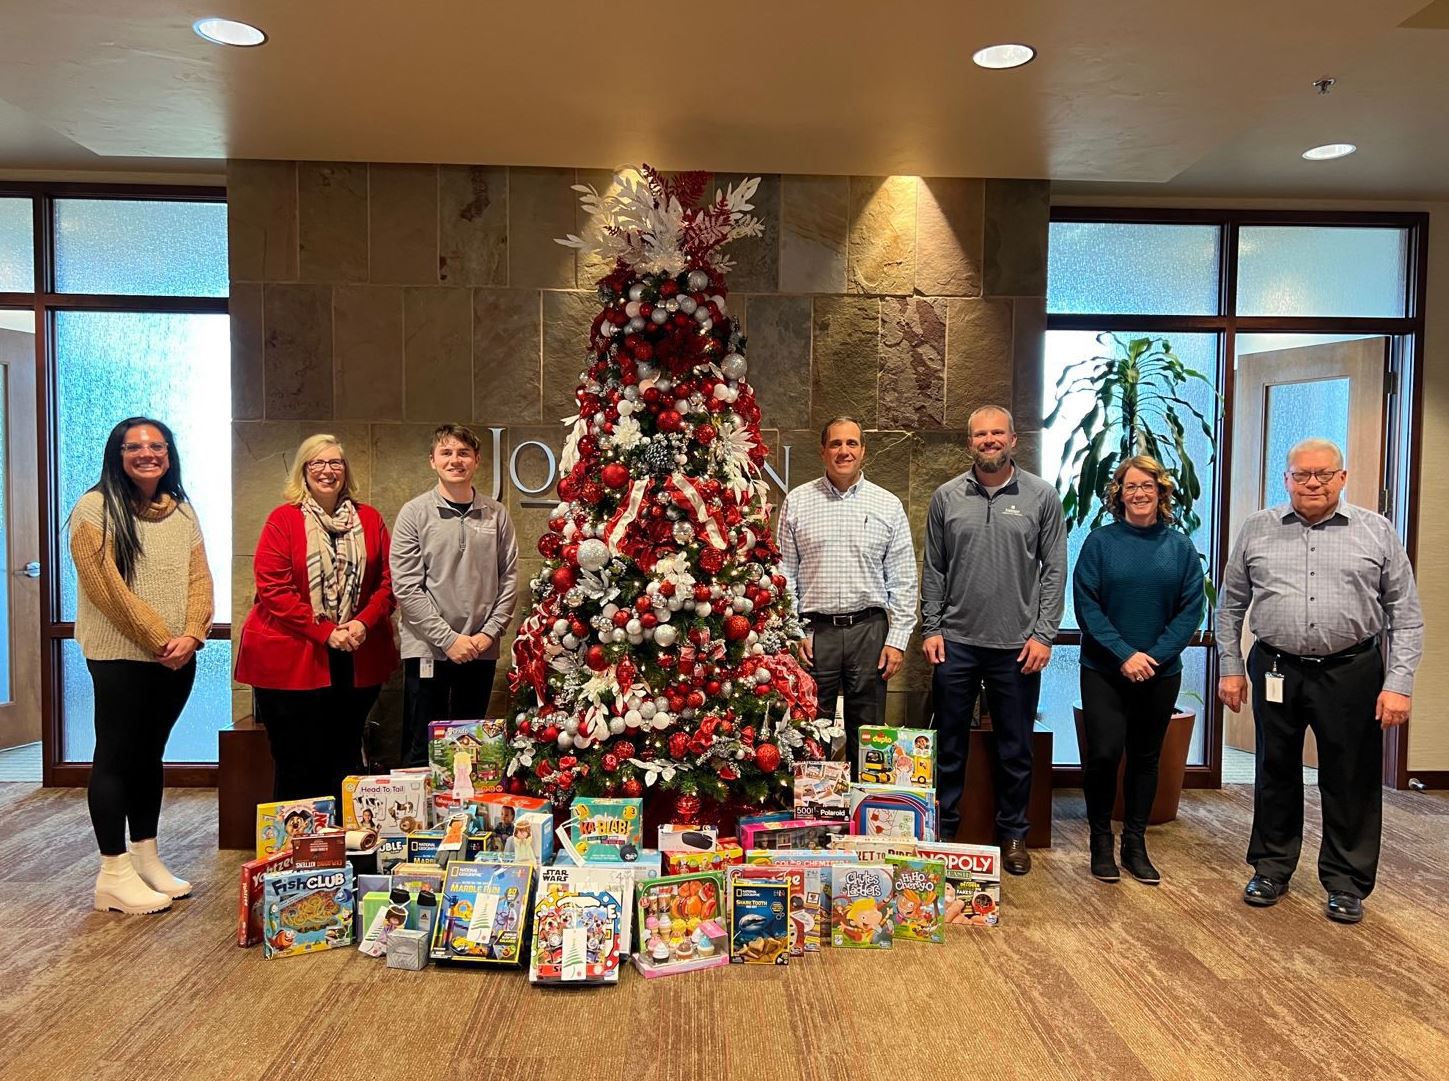 JFG Green Bay office partners with salvation army to bring board games to families this holiday season.